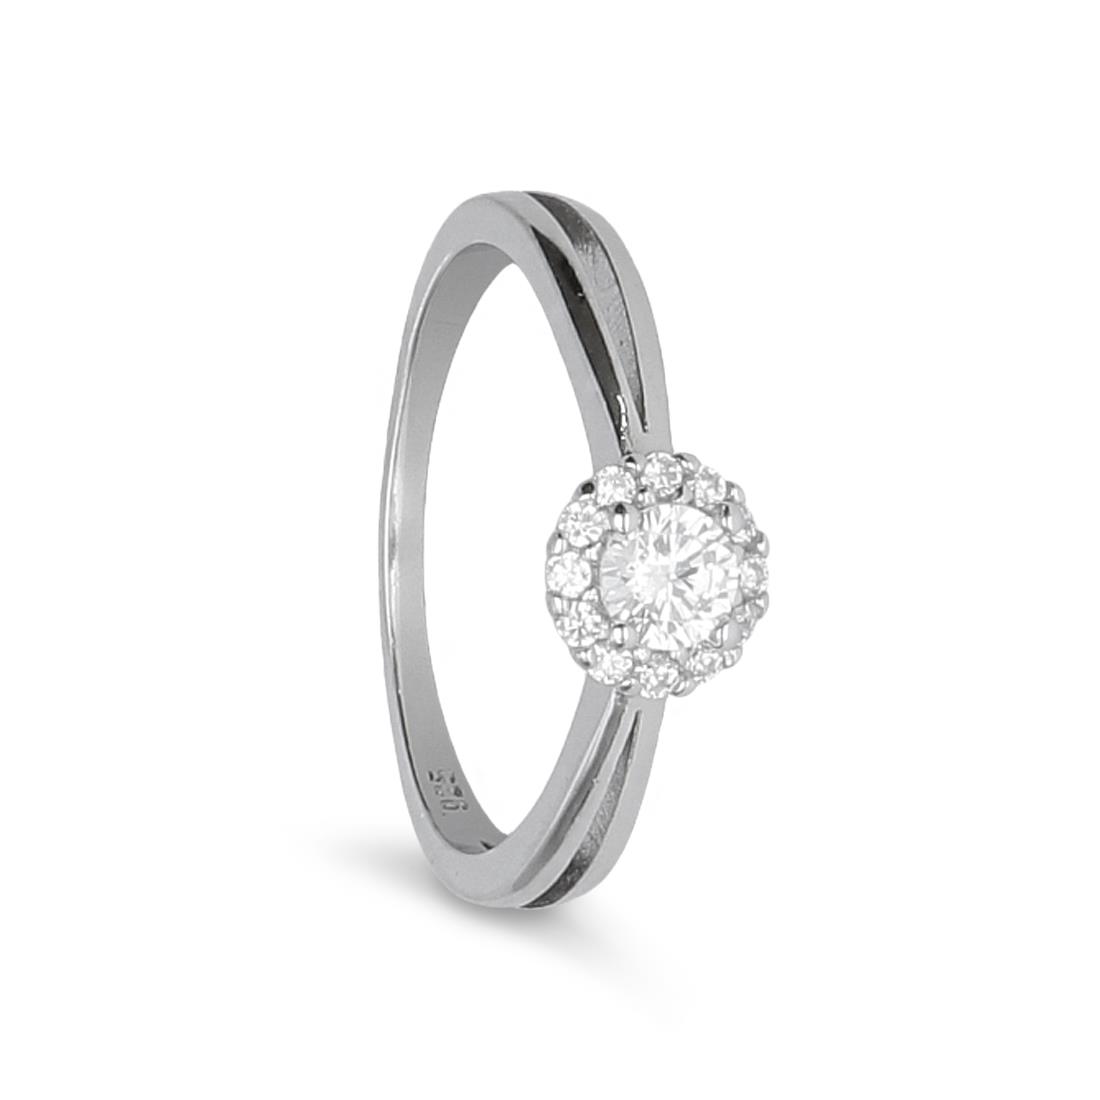 Silver solitaire ring with zircons - LUXURY MILANO